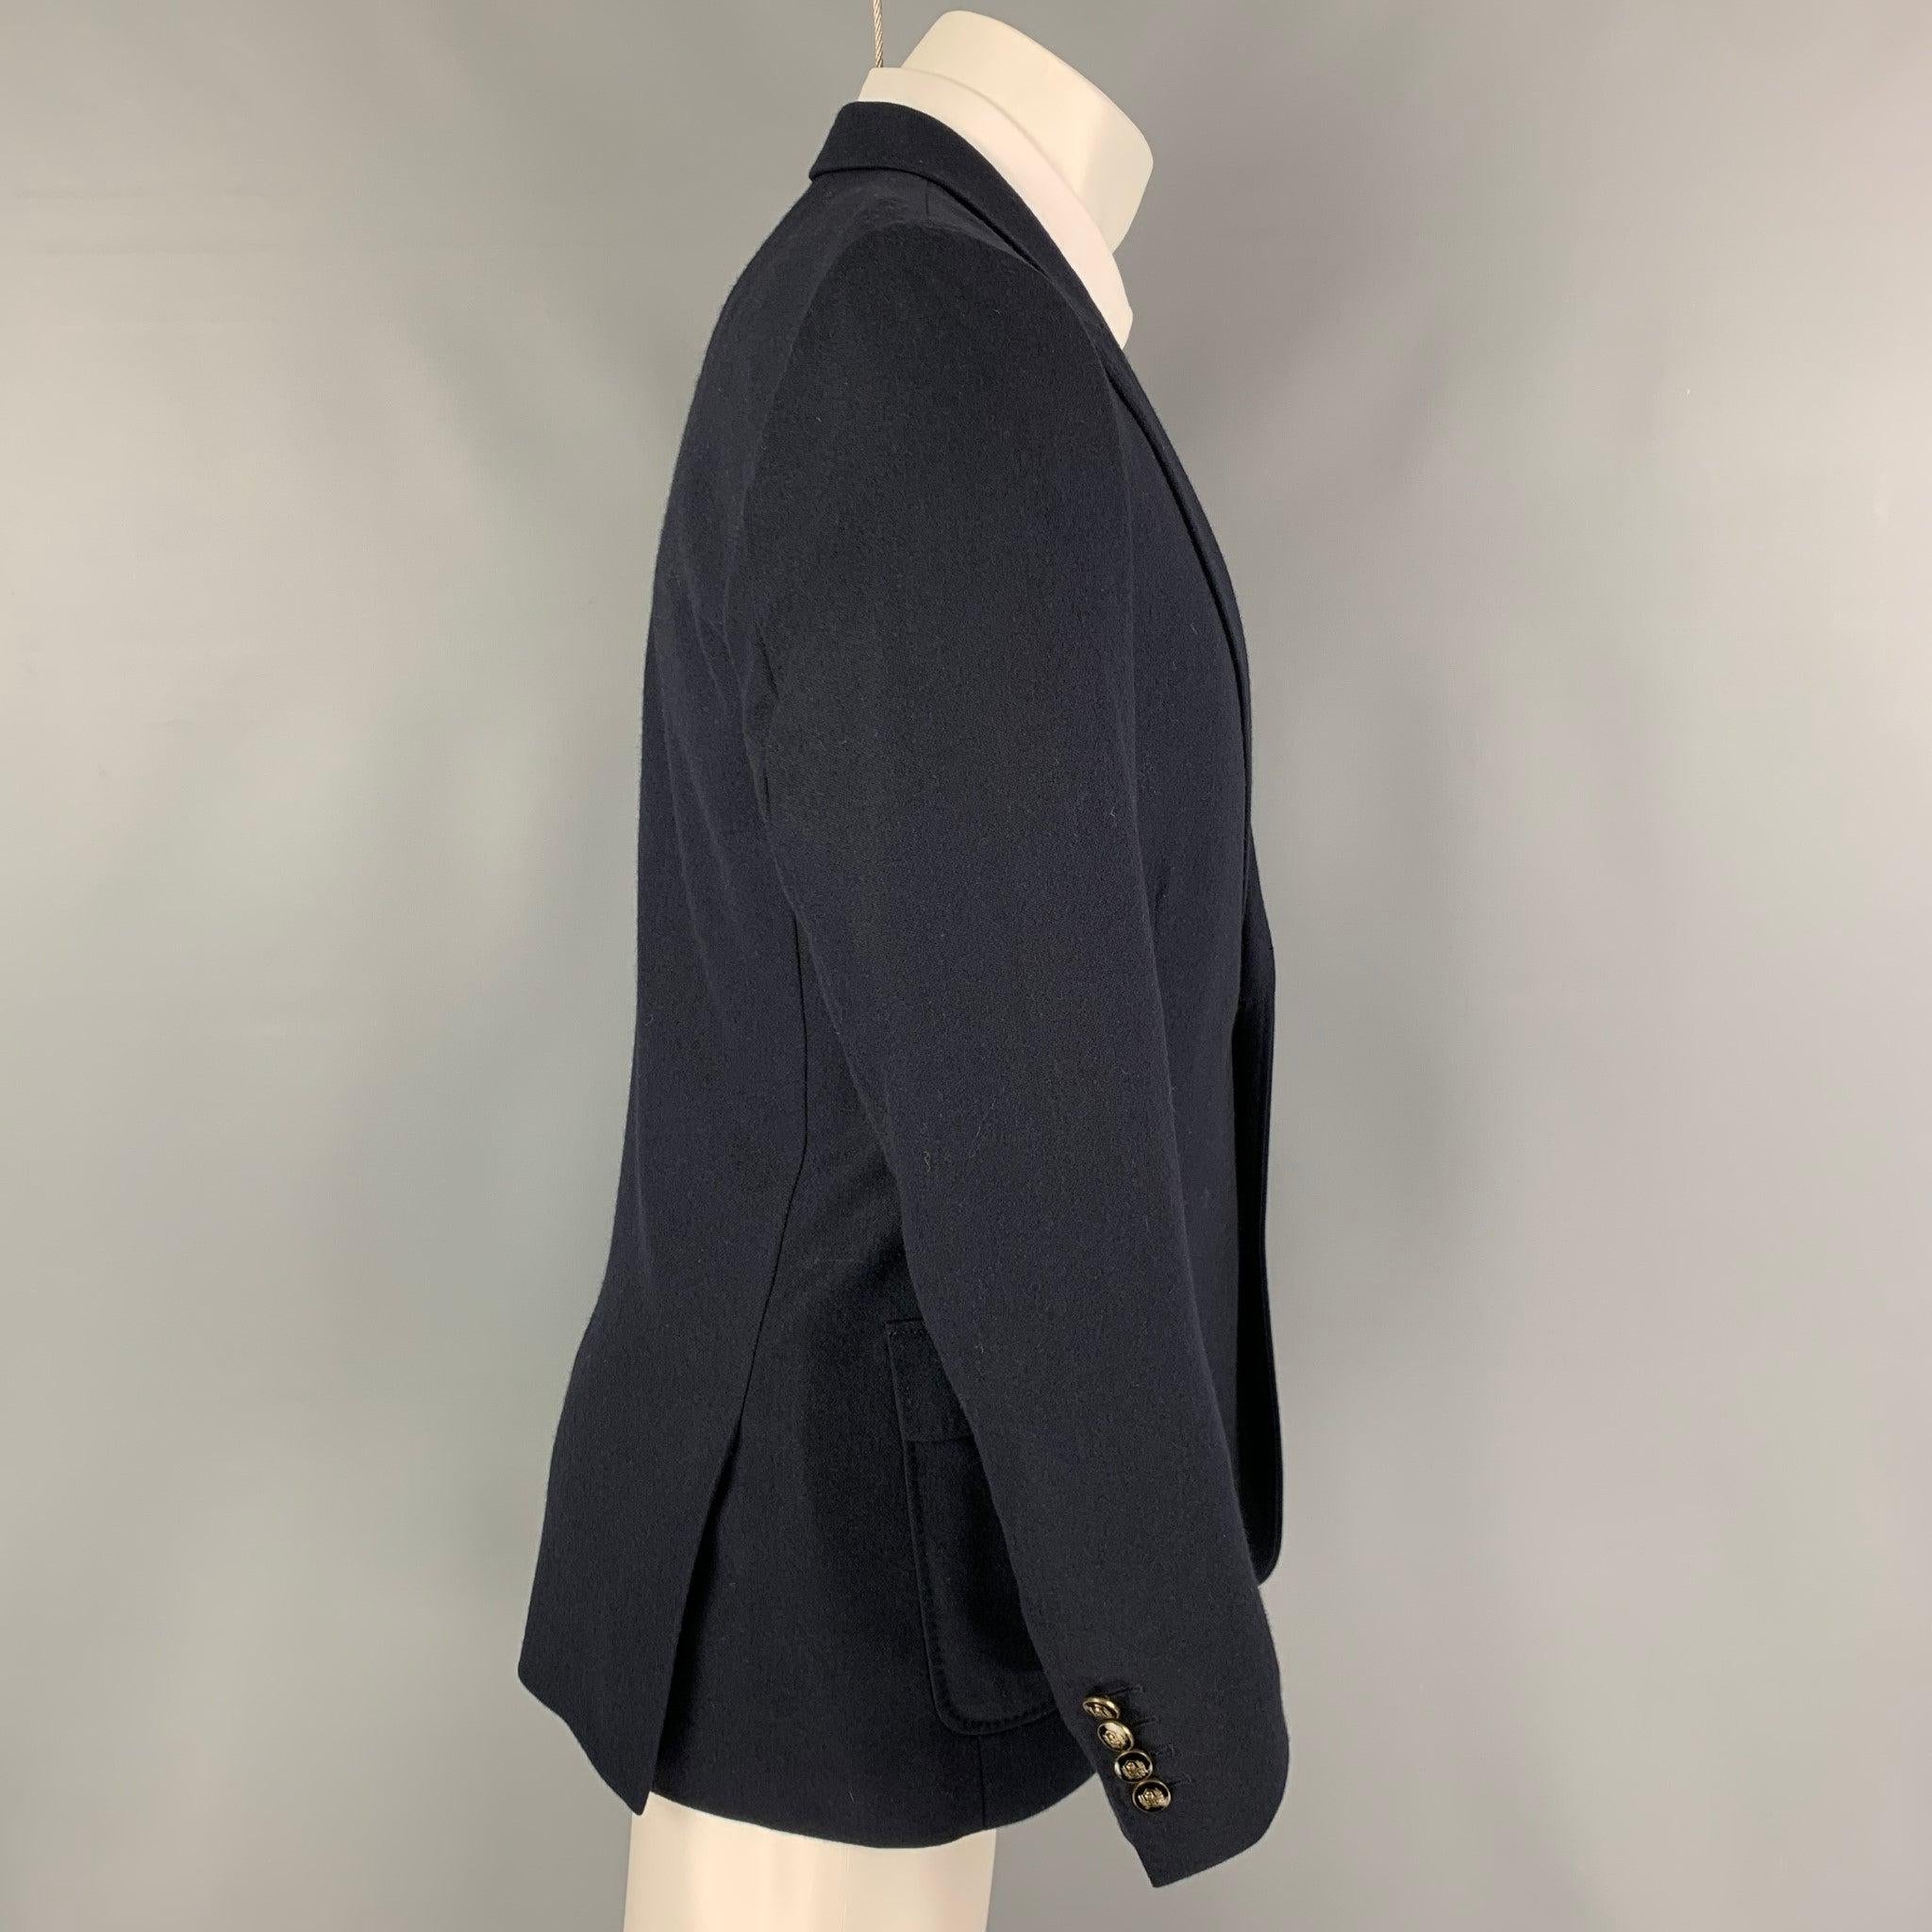 THE KOOPLES sport coat comes in a navy cashmere with a full liner featuring a peak lapel, flap pockets, double back vent, and a double button closure.
Excellent
Pre-Owned Condition. 

Marked:   50 

Measurements: 
 
Shoulder: 17 inches Chest: 40